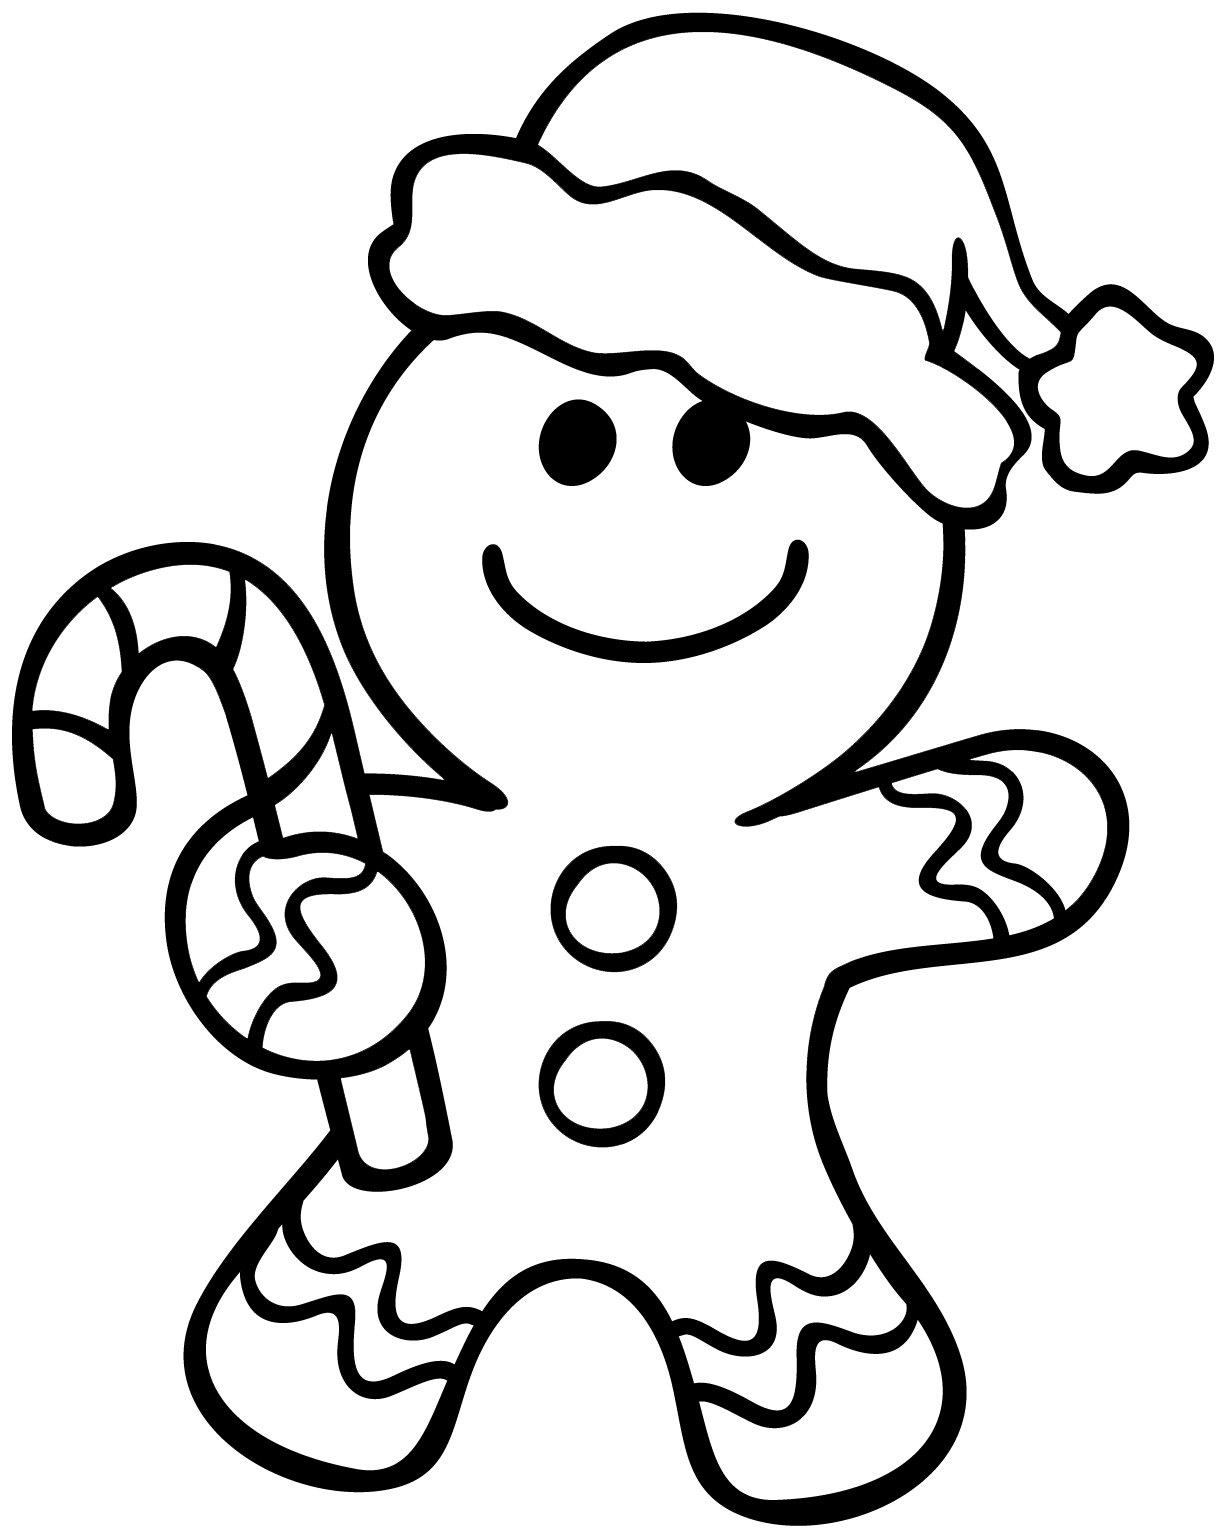 Gingerbread Man Coloring Page - Get ...